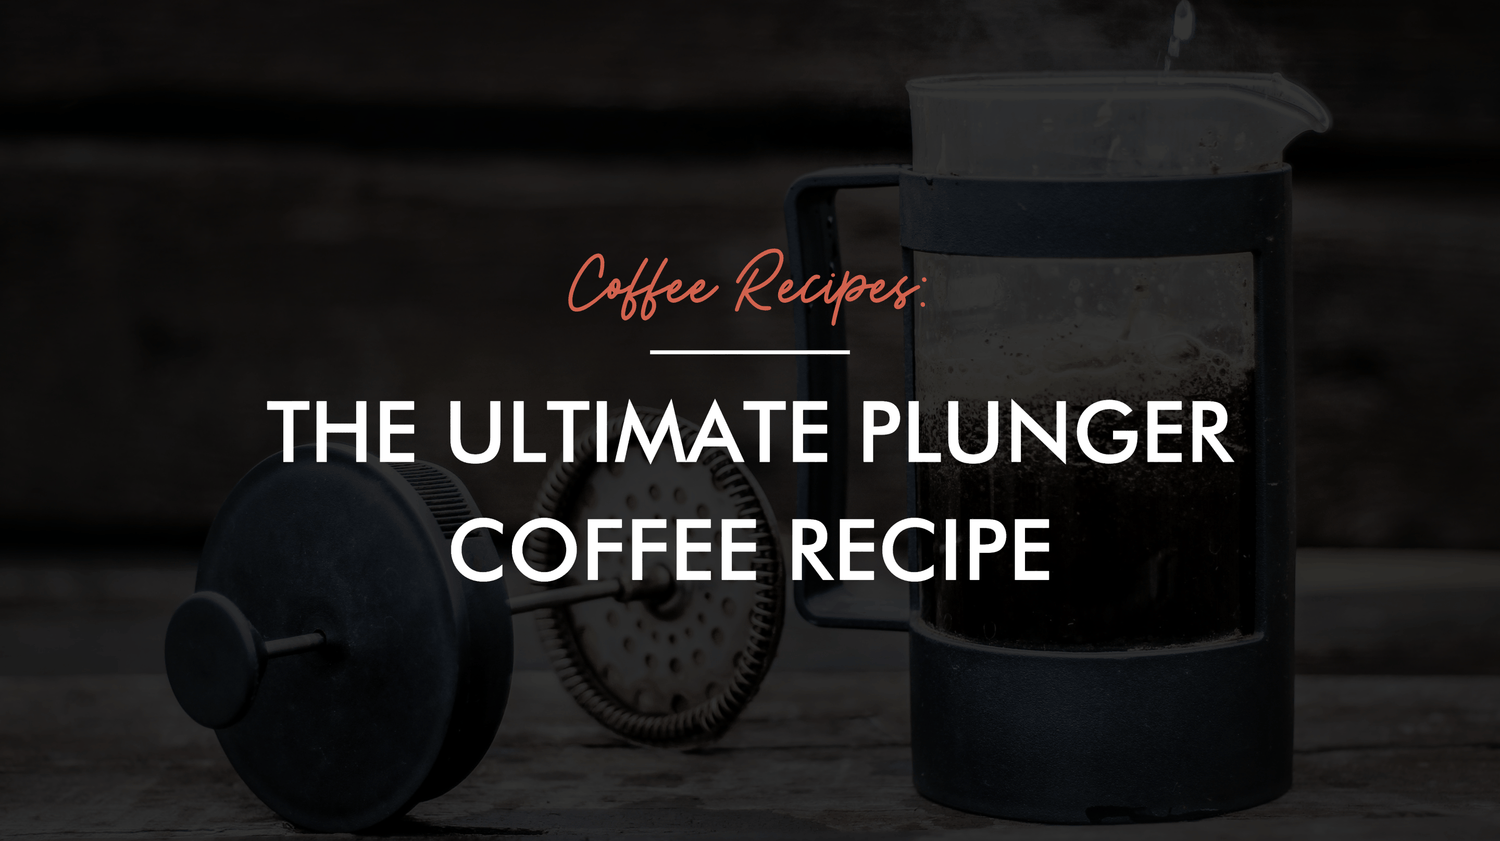 ULTIMATE PLUNGER COFFEE RECIPE